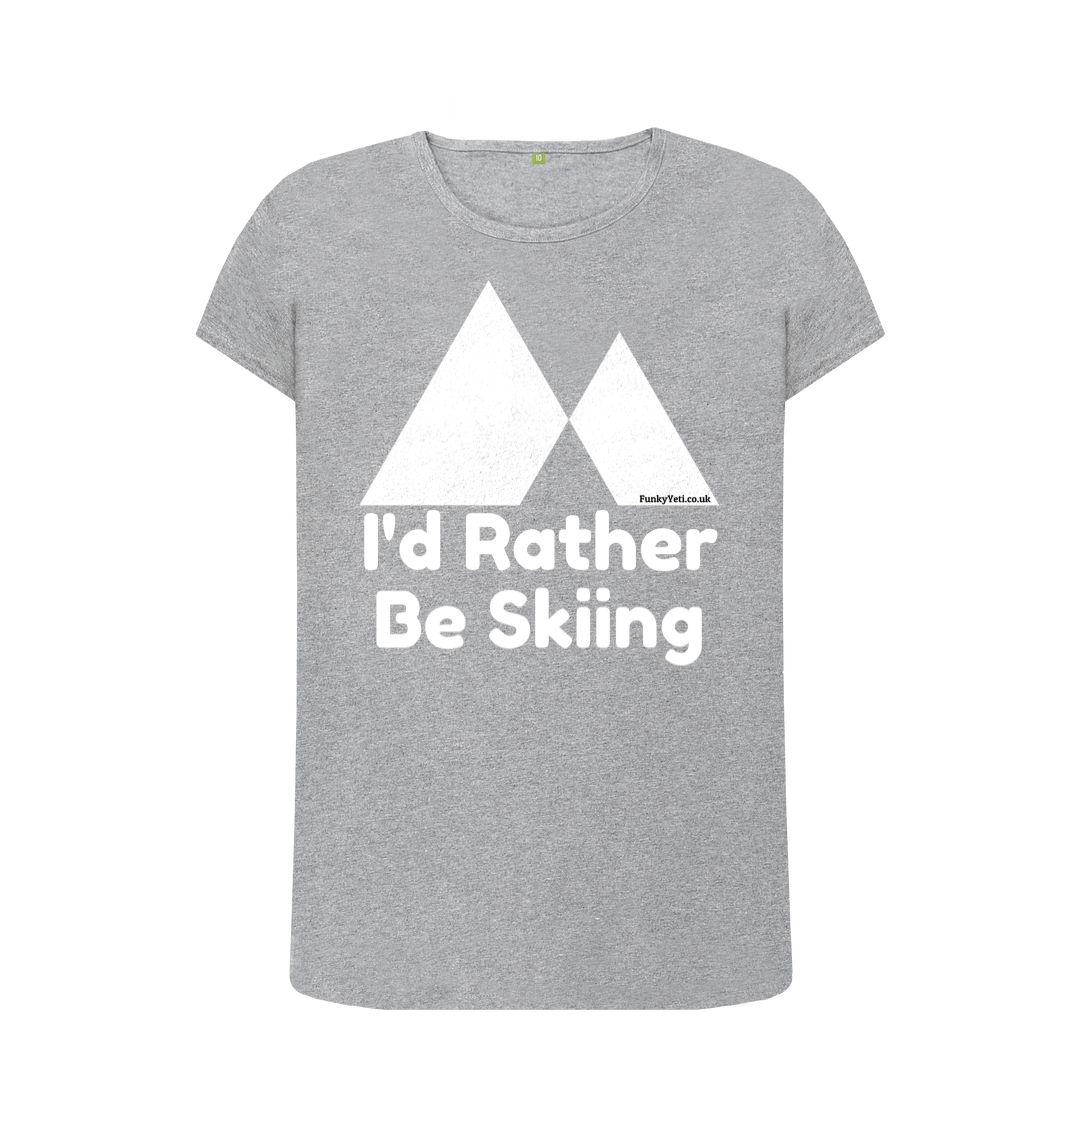 Athletic Grey Funky Yeti Women's Tee - I'd Rather Be Skiing